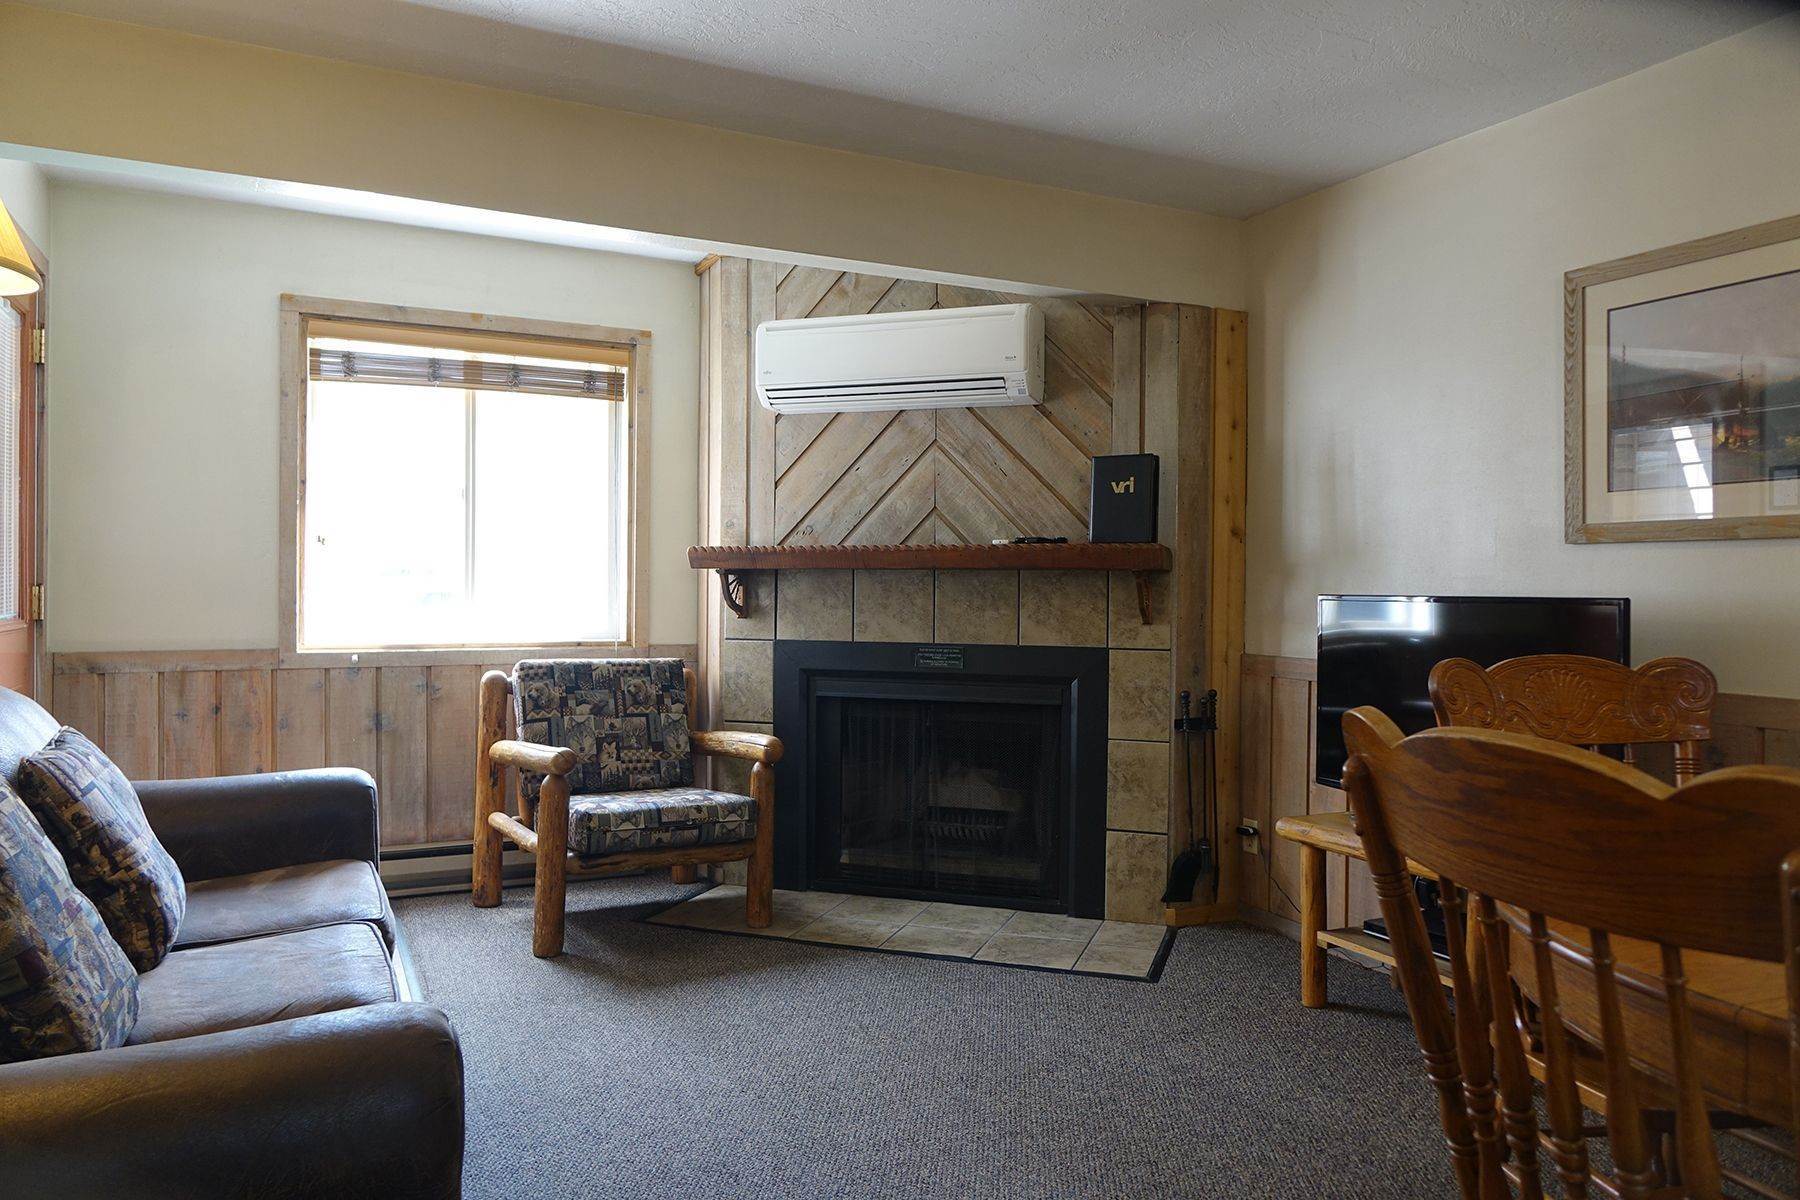 Fractional Ownership Property for Sale at Fractional Ownership at Town Center Resort 335 W Broadway Avenue, #12 Jackson, Wyoming 83001 United States